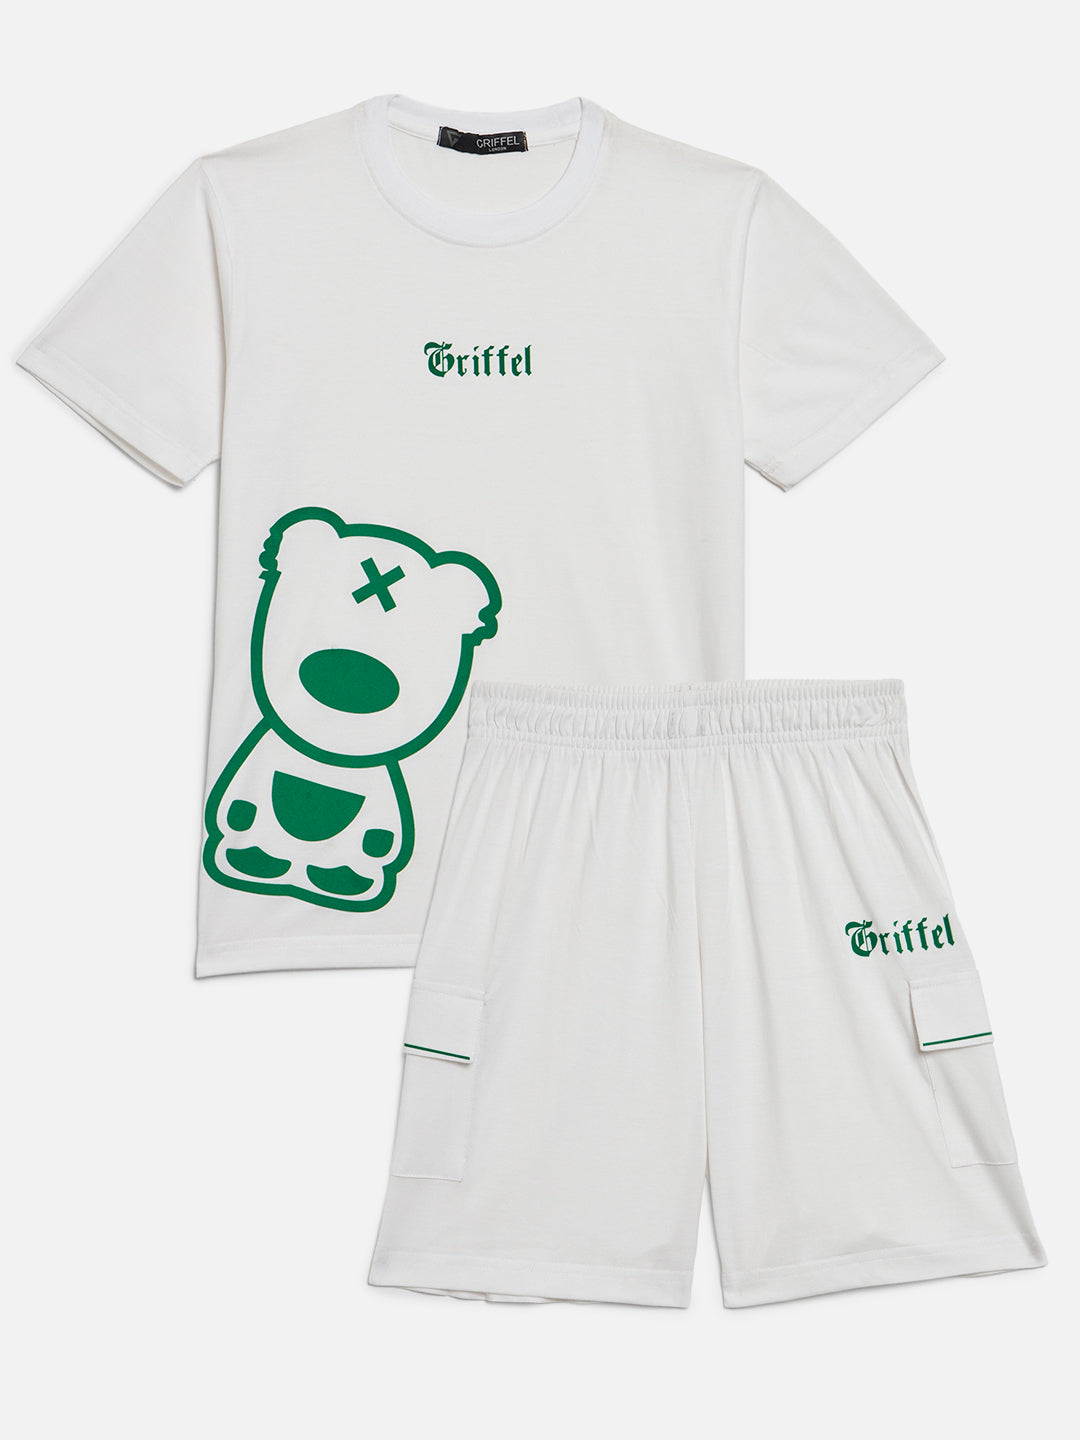 GRIFFEL Girls Kids White Co-Ord T-shirt and Short Set - griffel